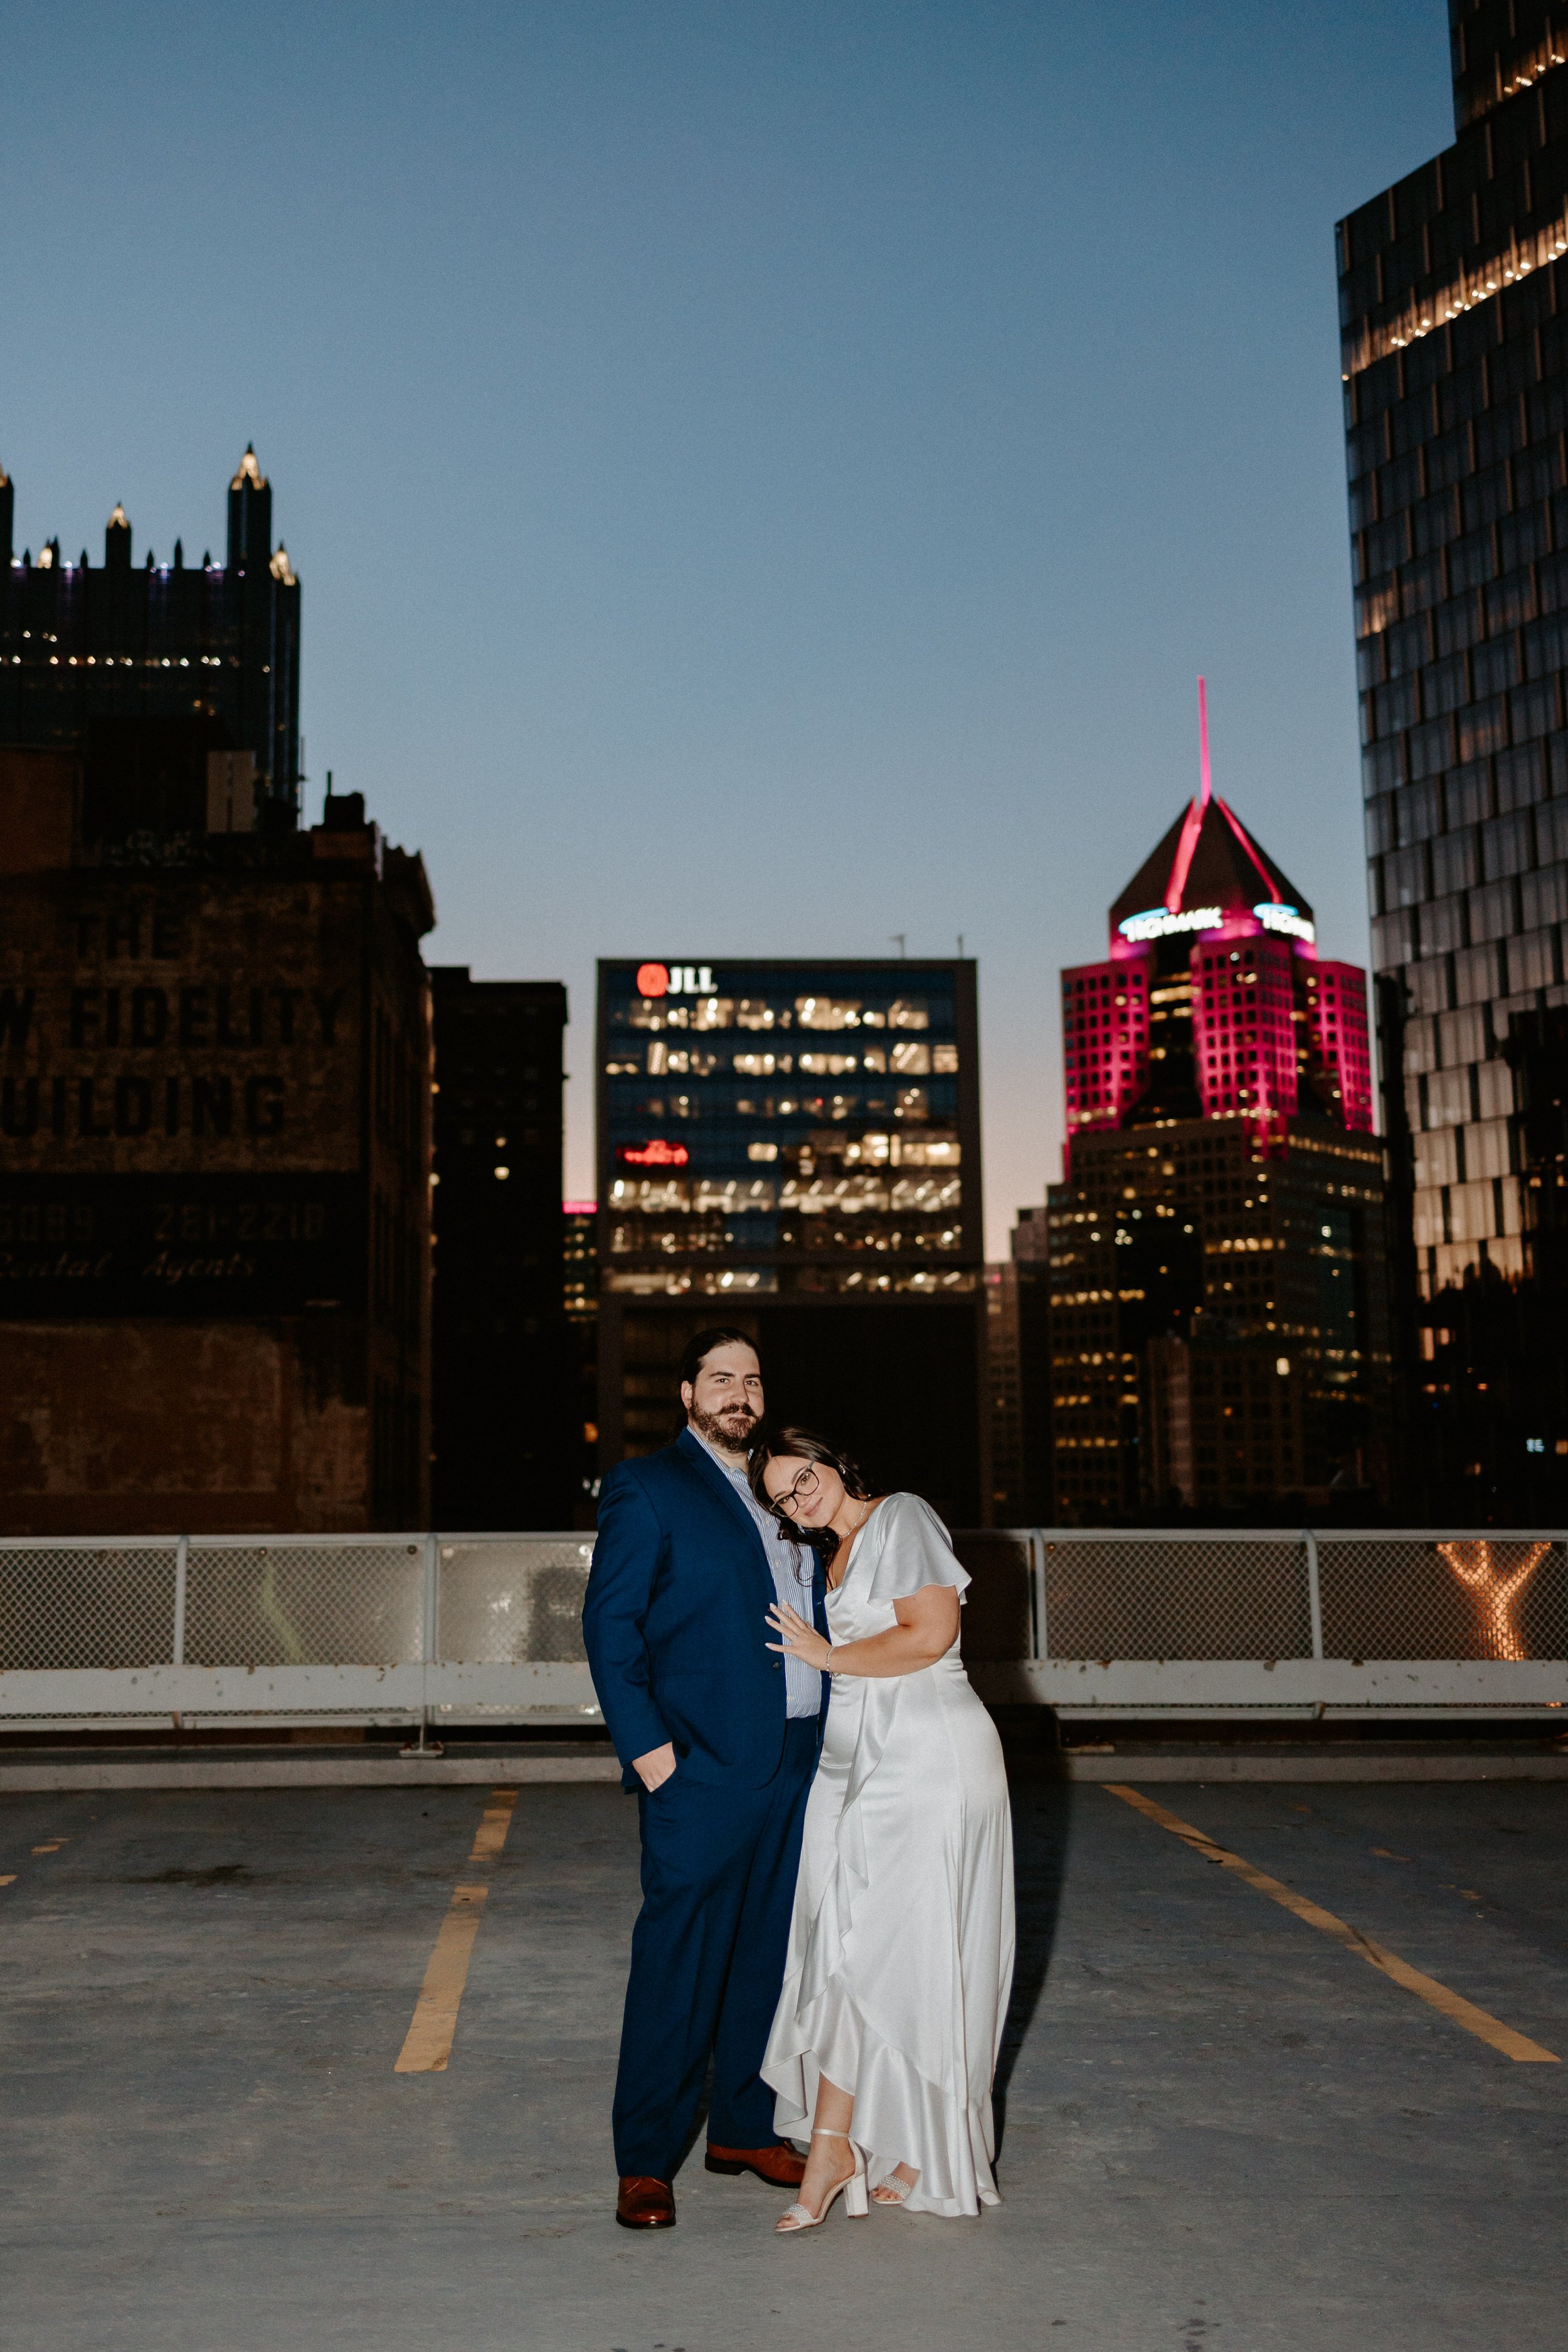 Woman and man embrace on parking garage roof with night time city skyline.